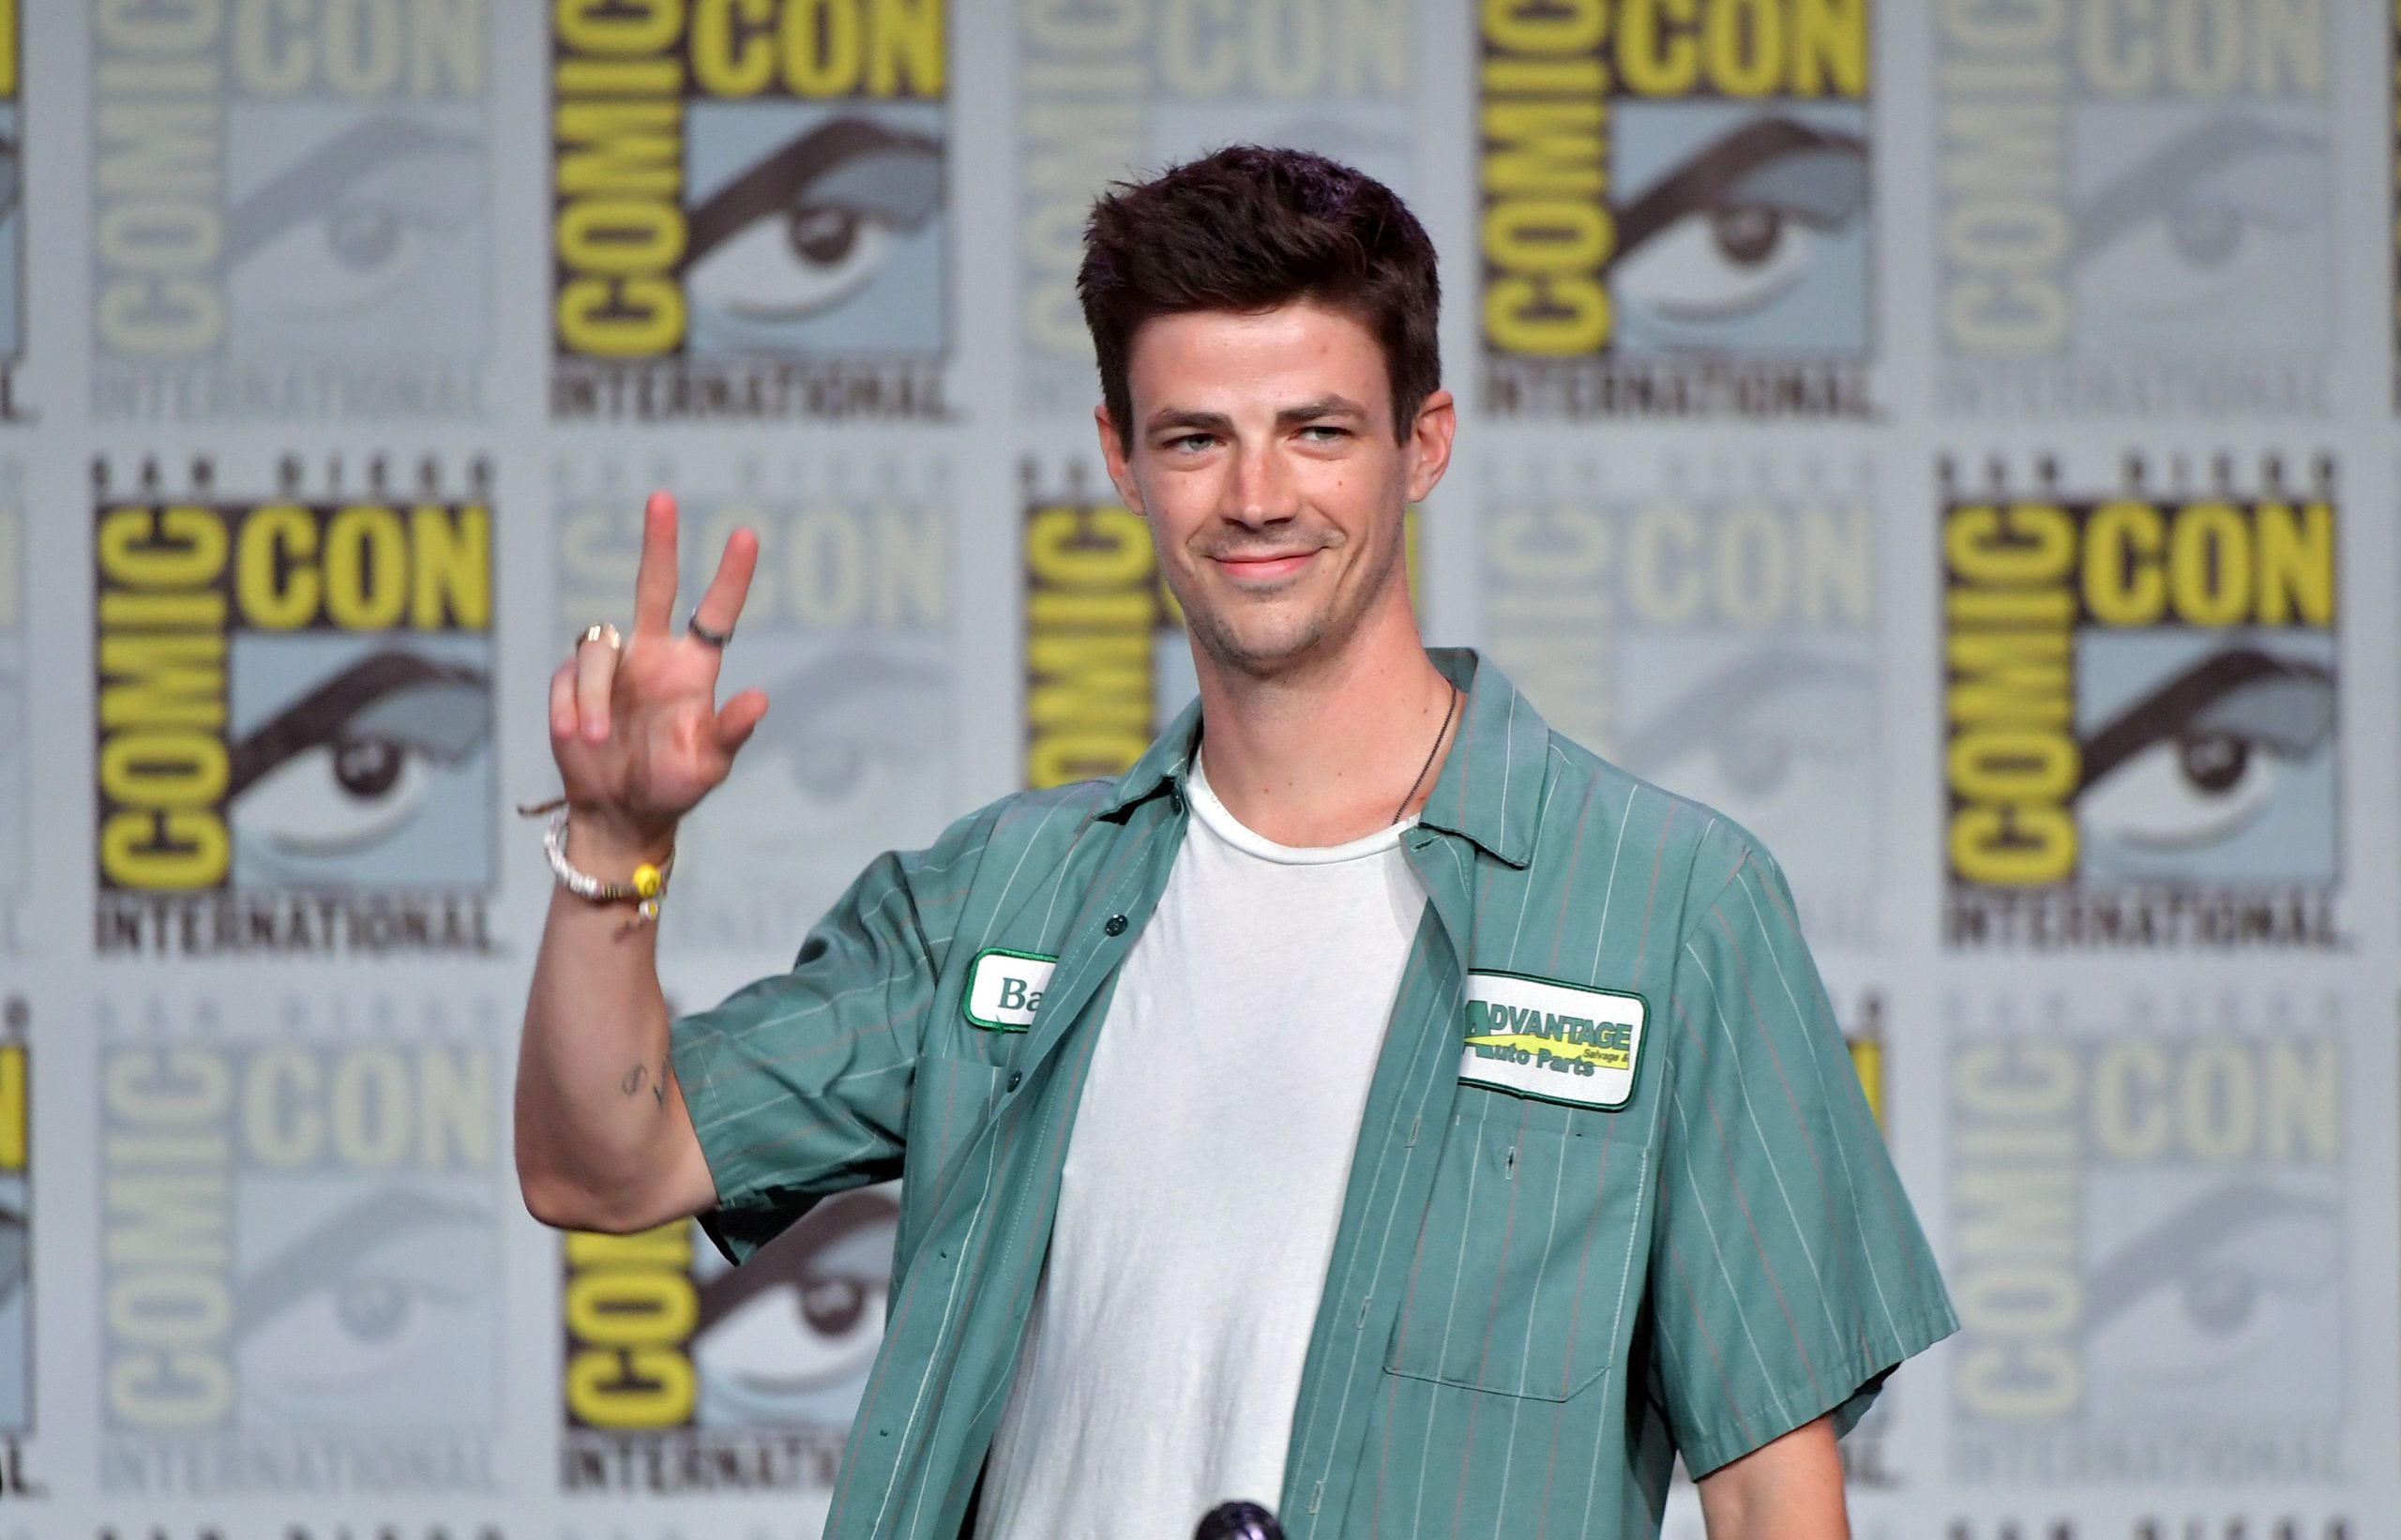 Grant Gustin weight loss